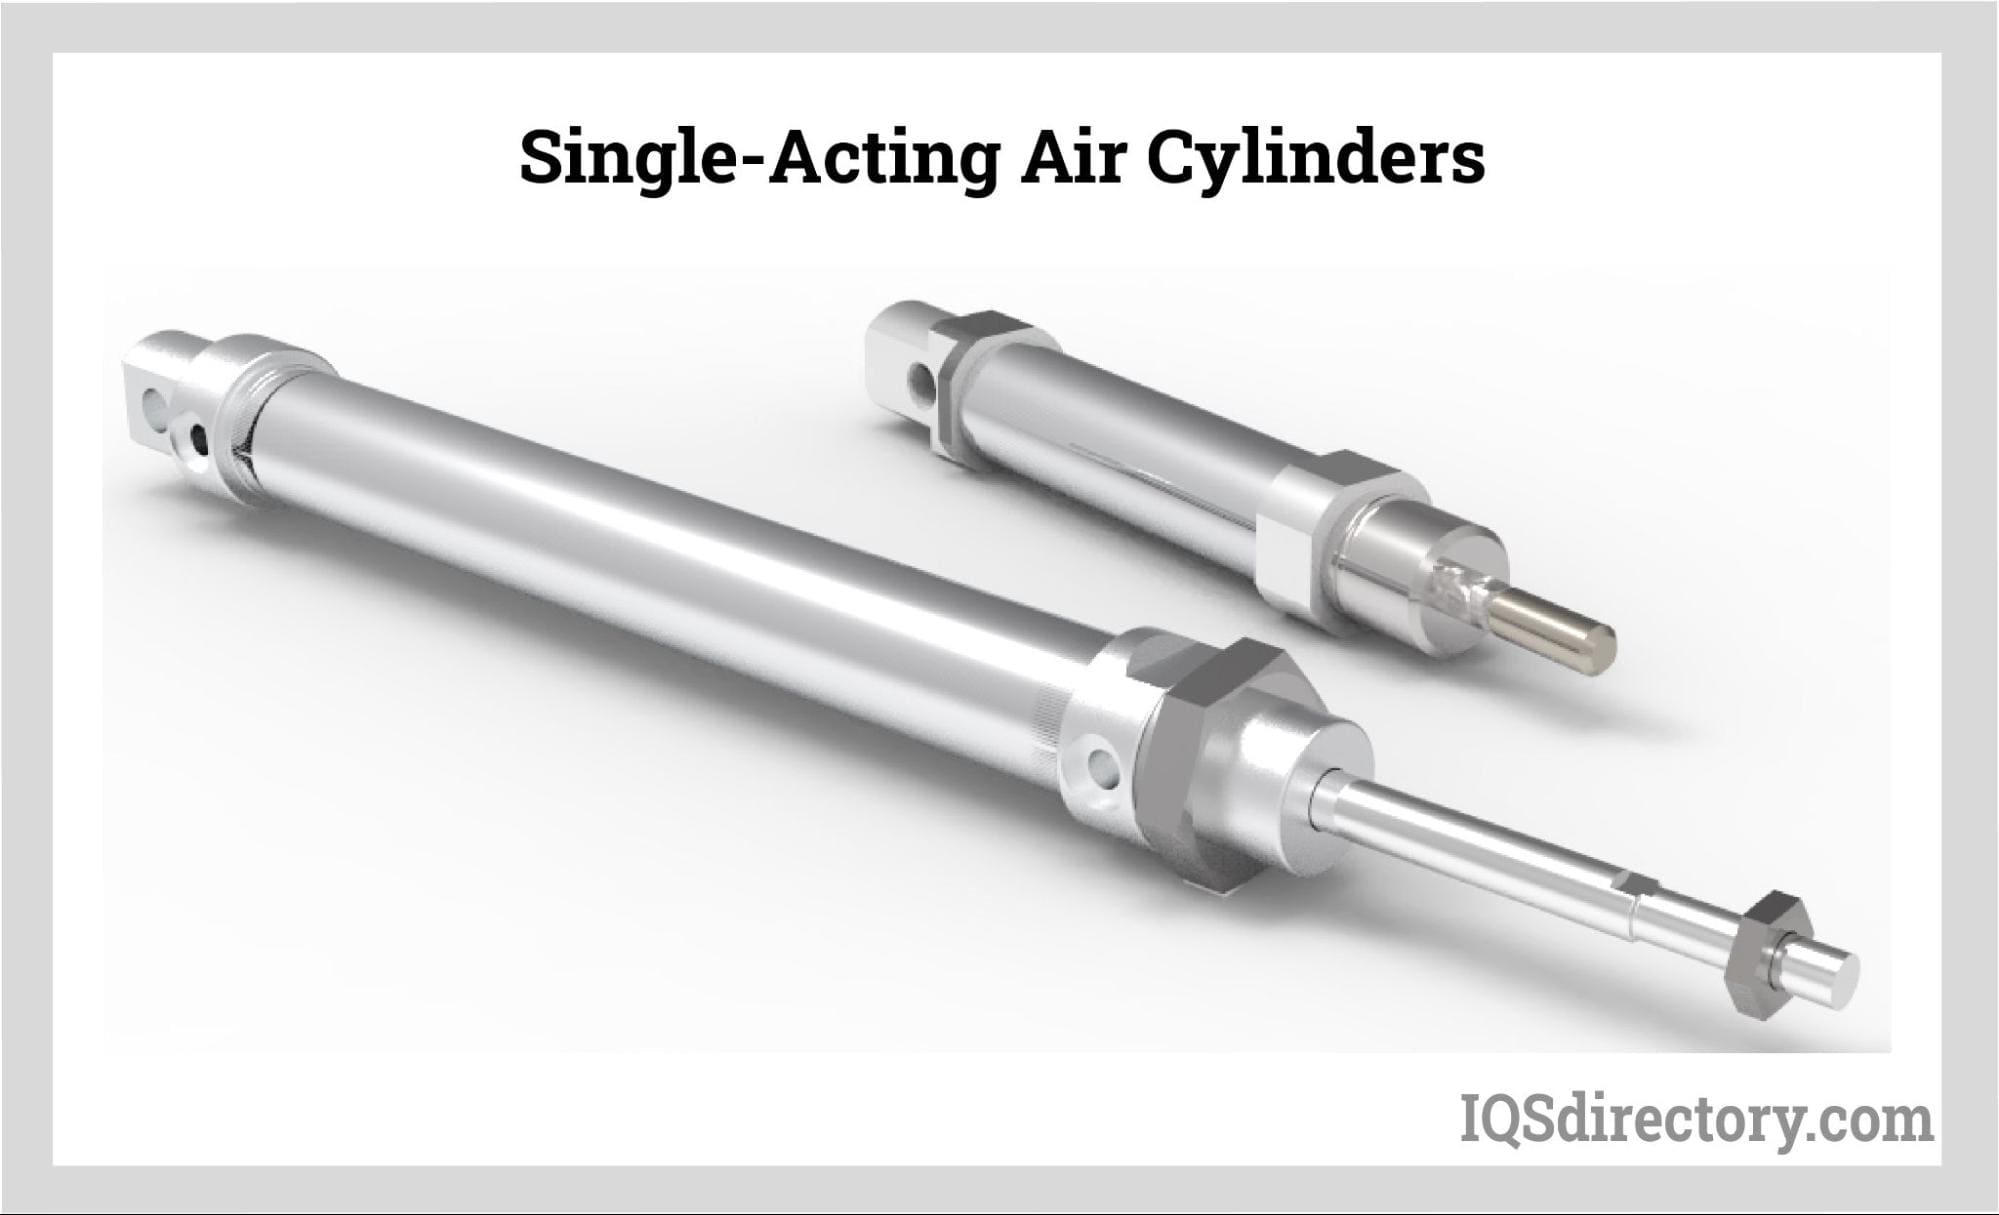 Single-Acting Air Cylinders